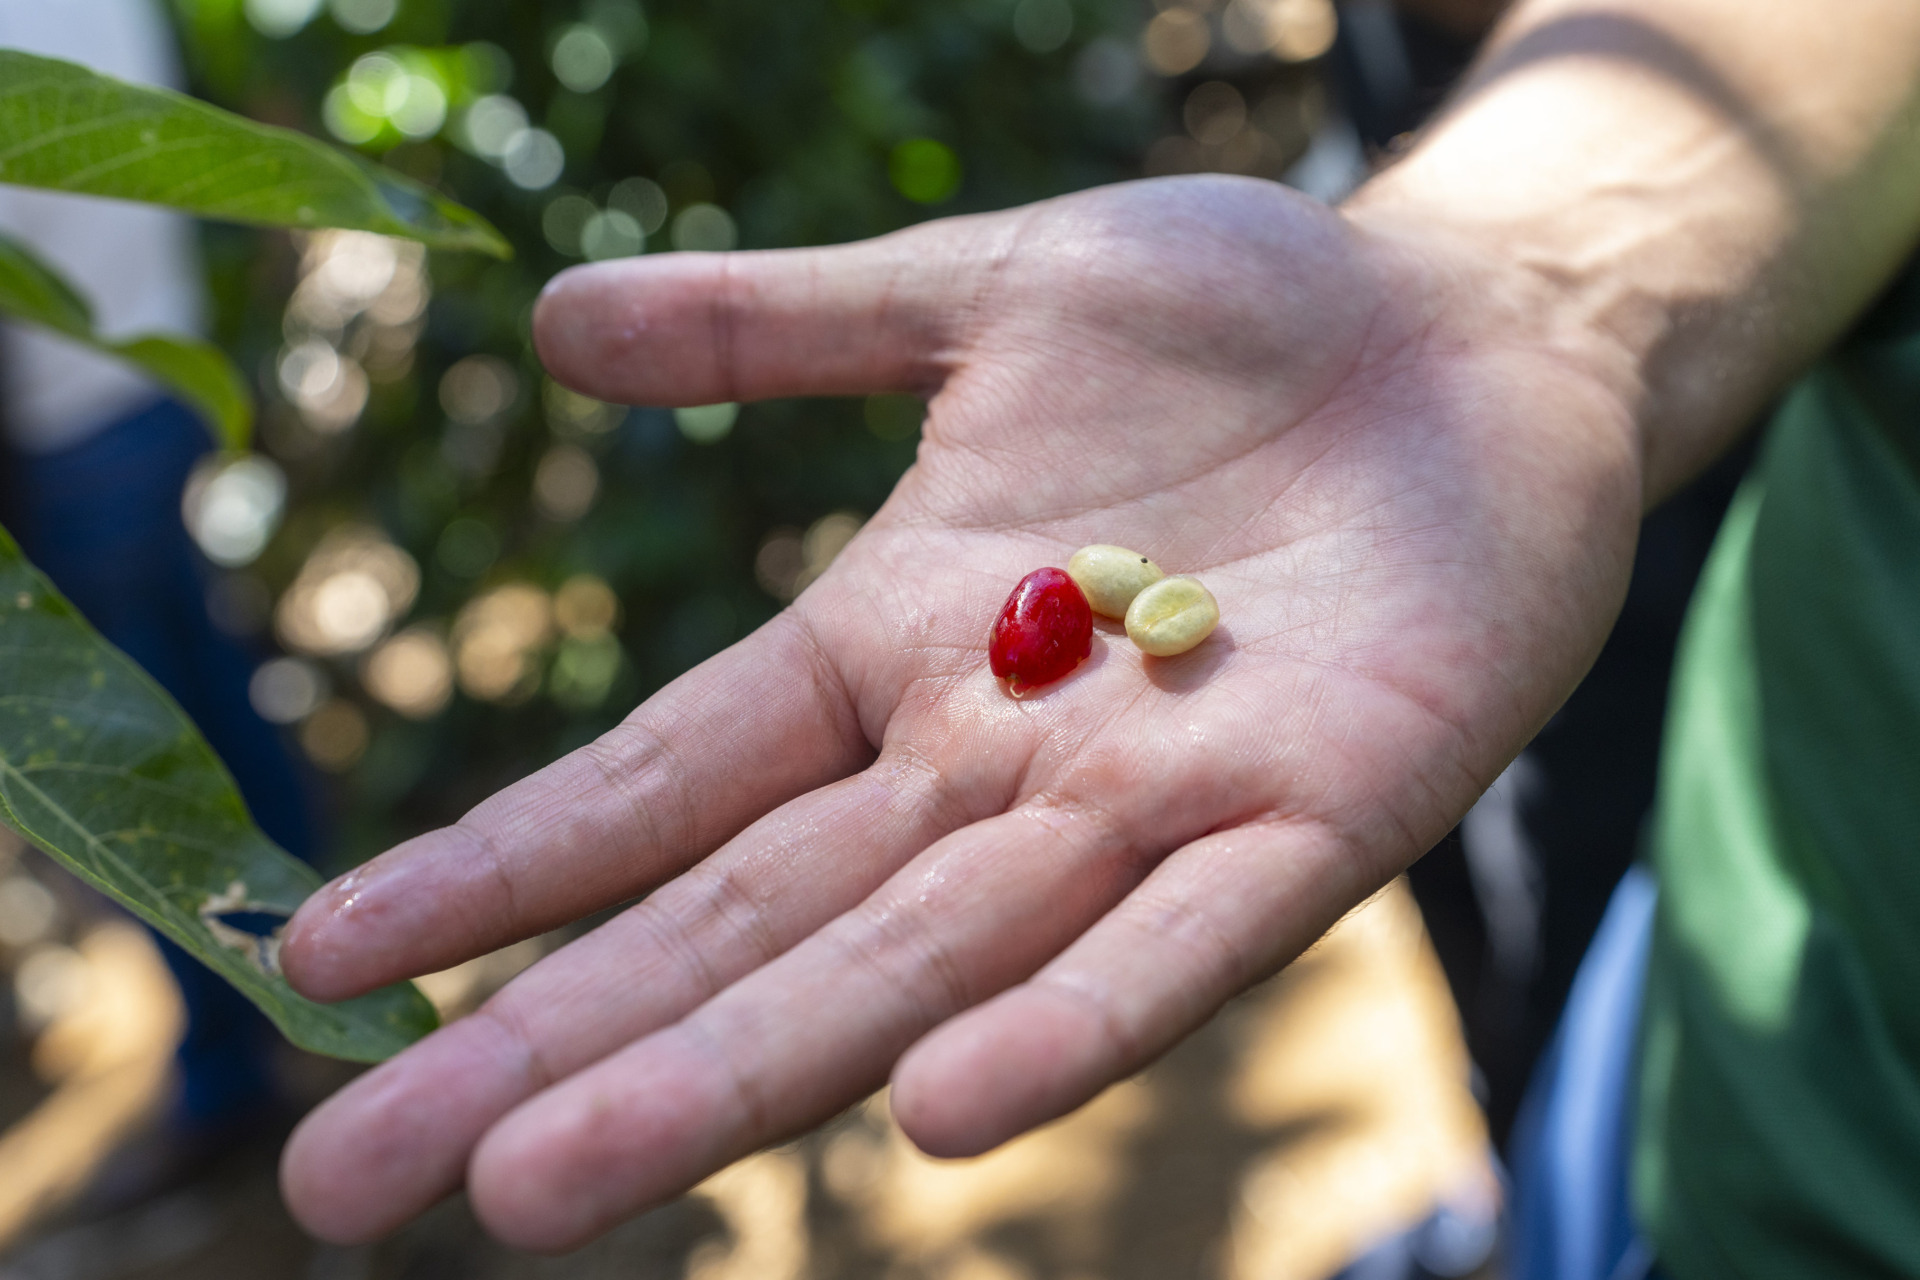 A hand holding coffee beans that have been removed from the fruit